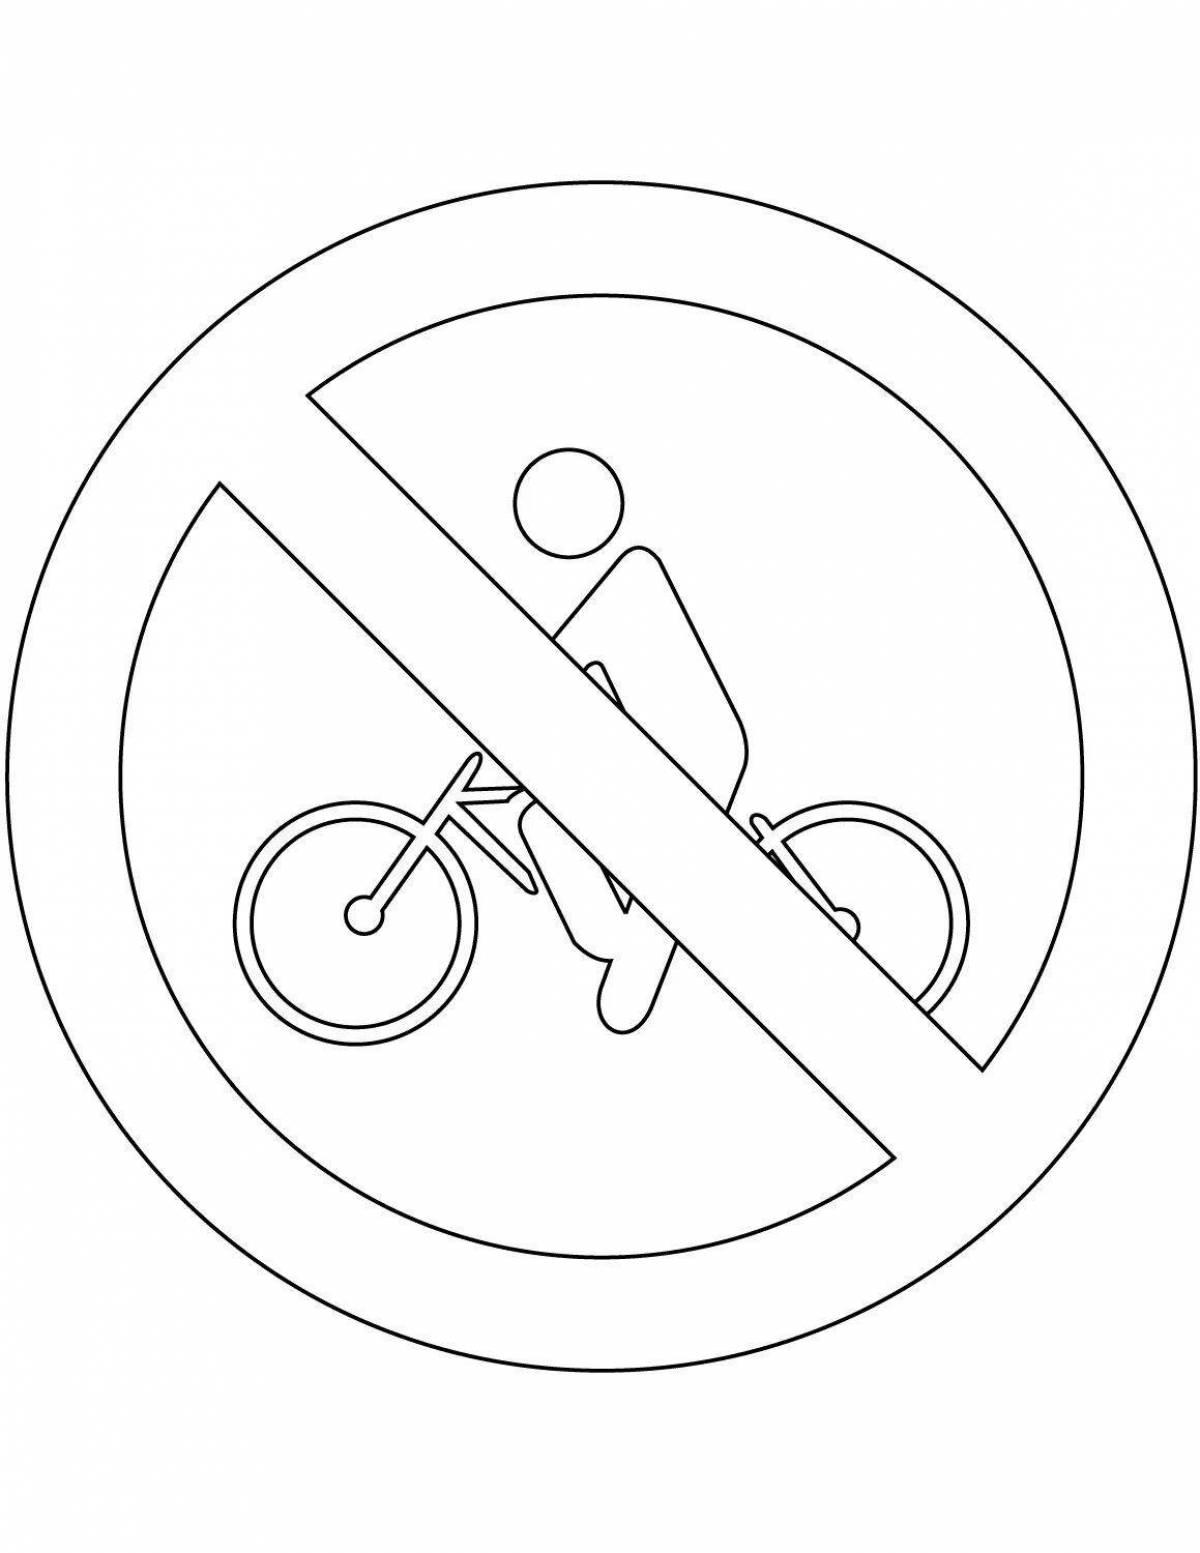 Coloring page glowing no pedestrian traffic sign